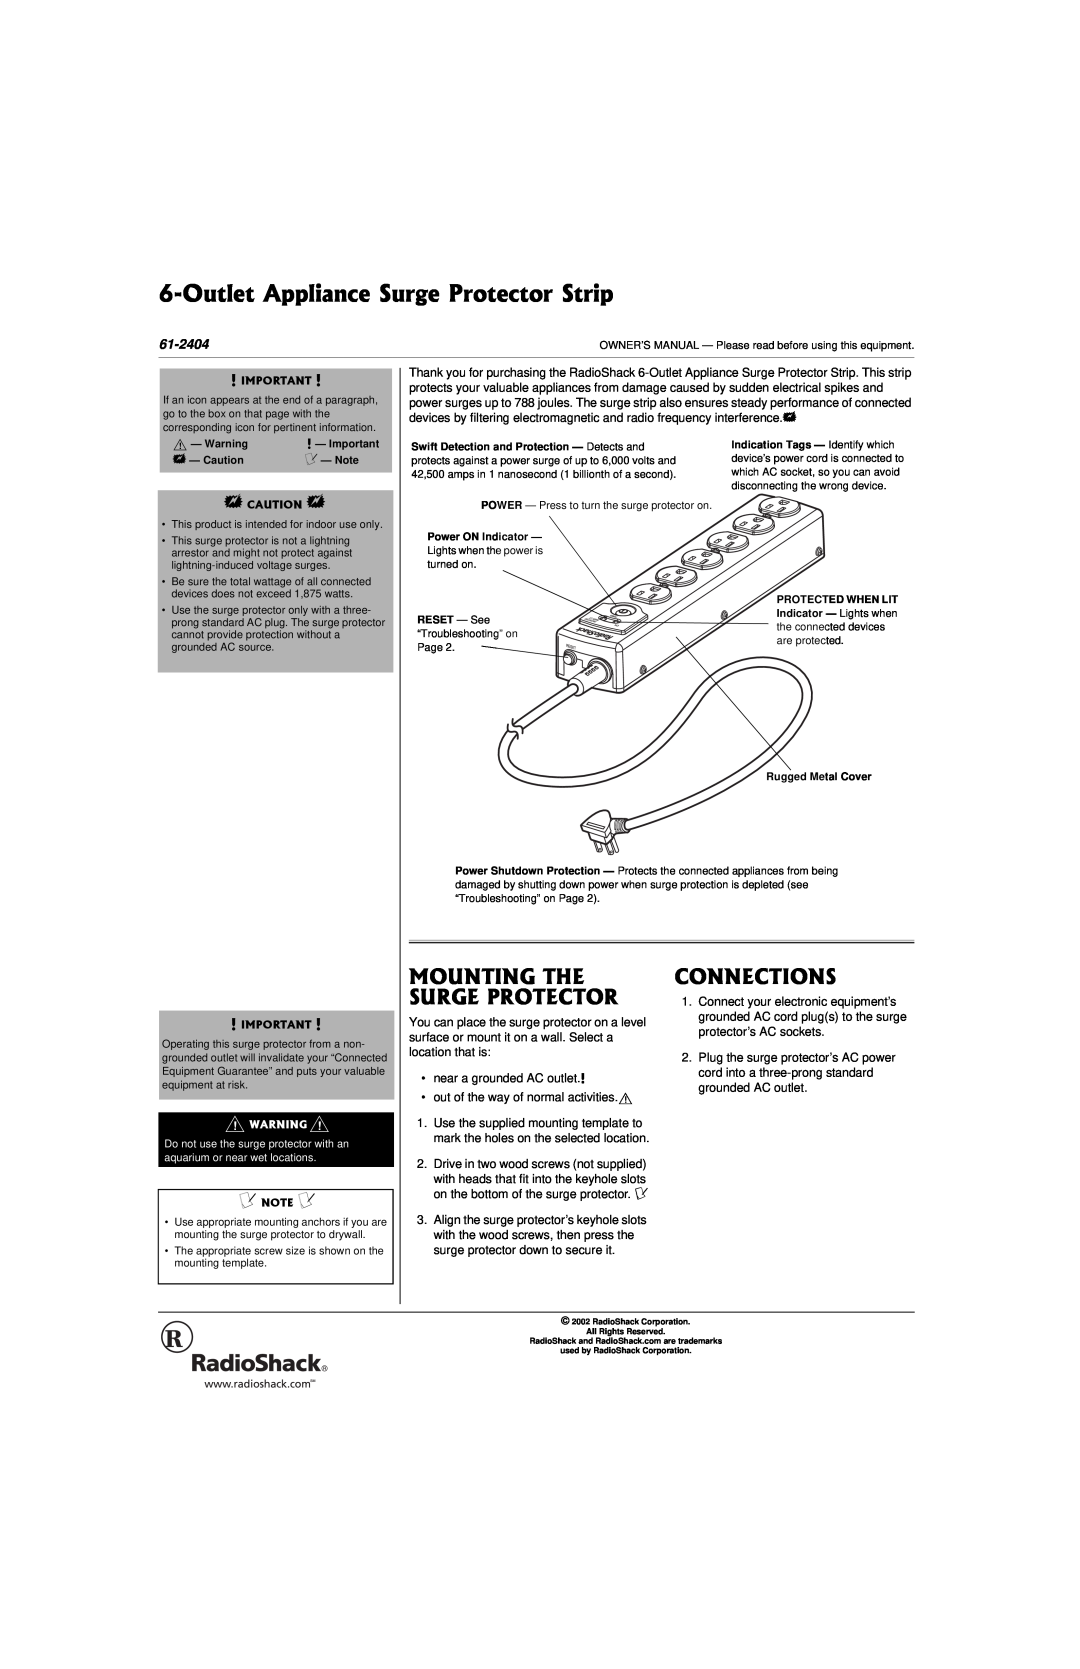 Radio Shack 61-2404 owner manual Mounting The Surge Protector, Connections, Outlet Appliance Surge Protector Strip 